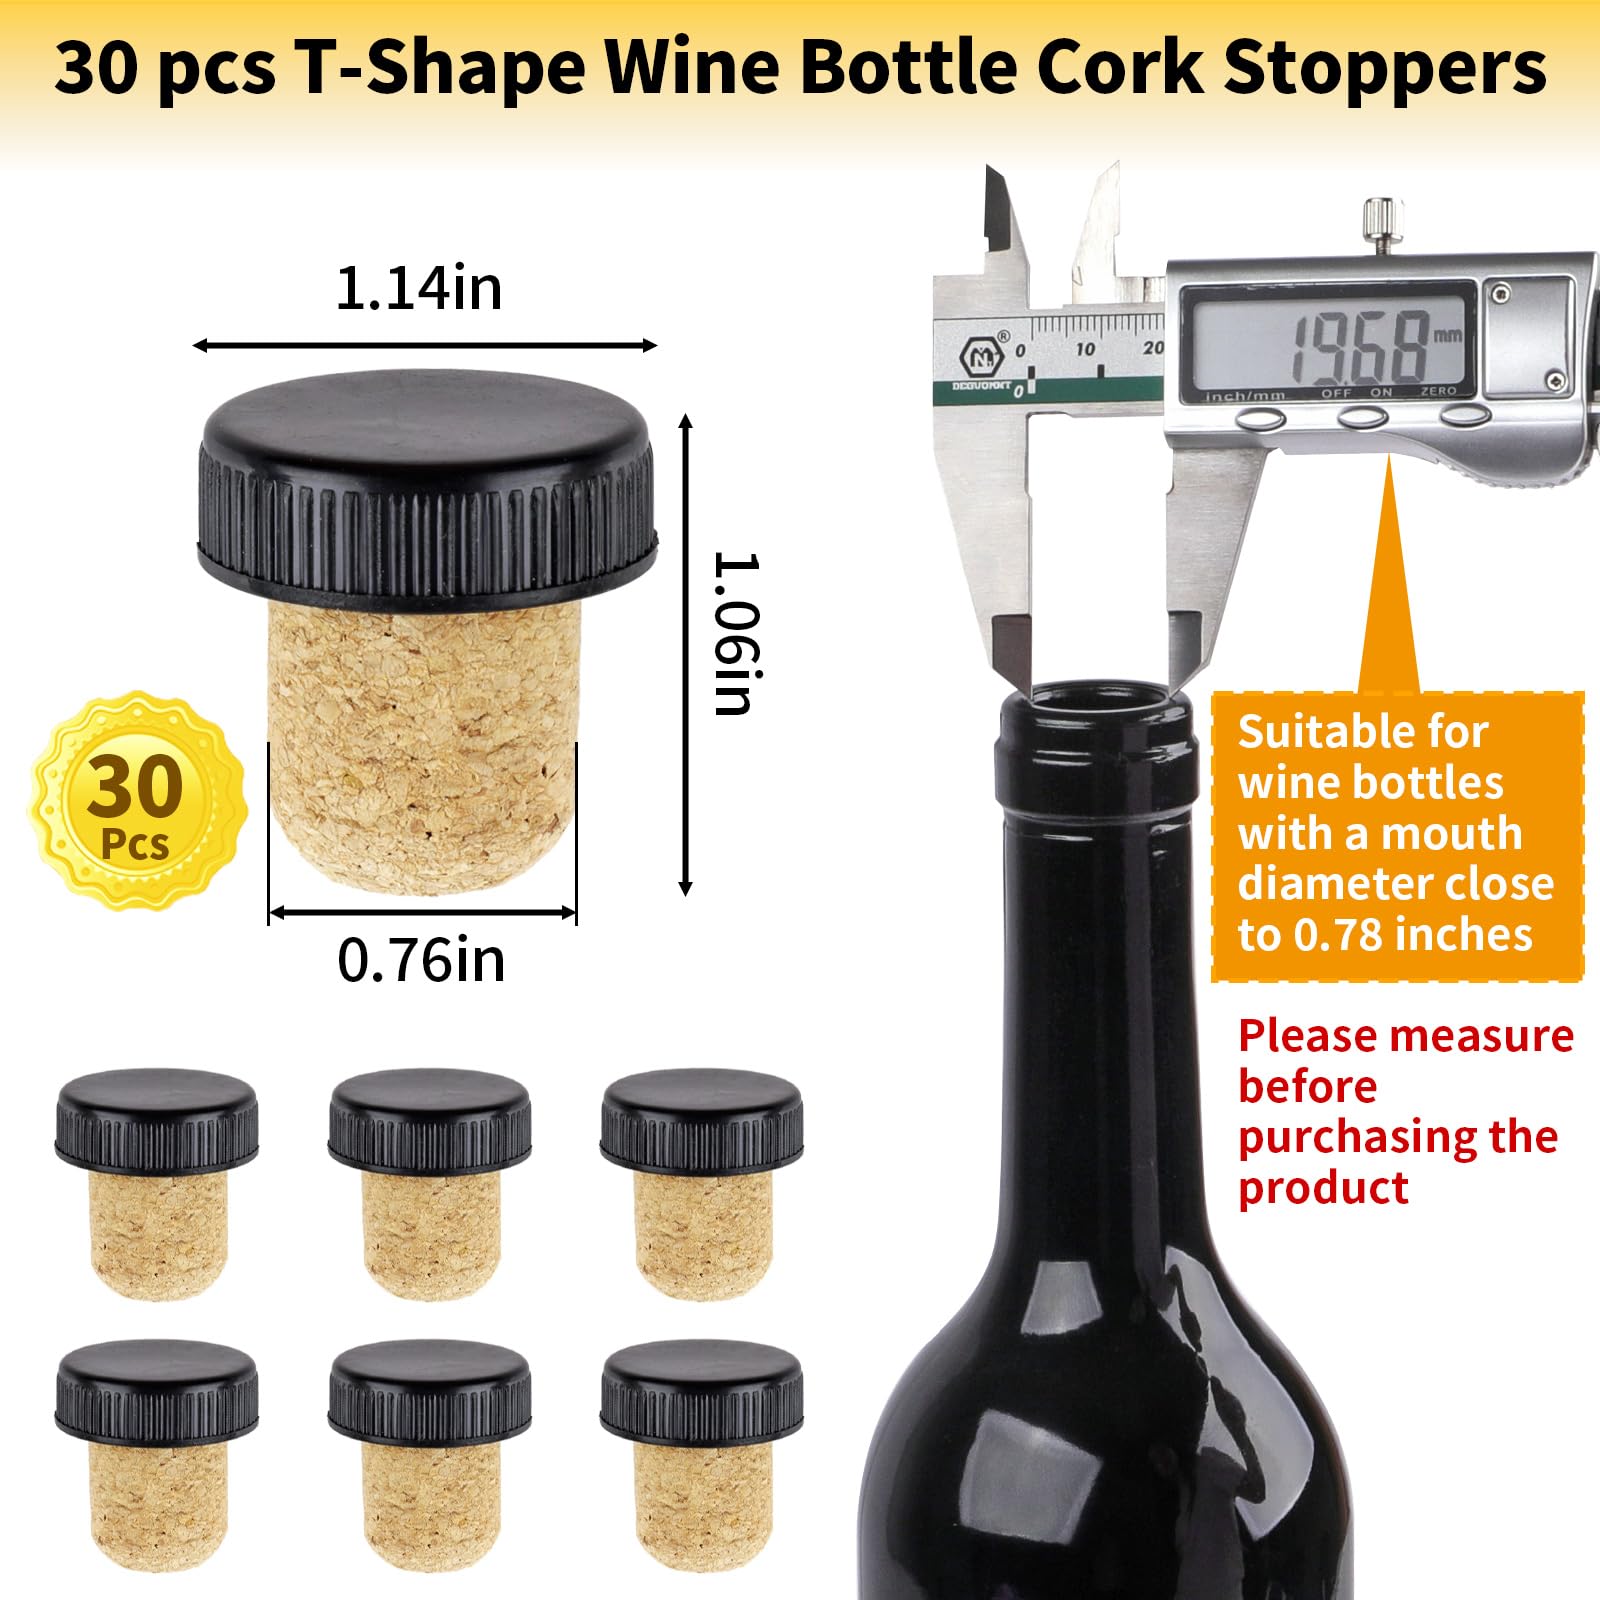 Wine Sealer for Wine Bottles - 60 pcs Wine Bottle Resealer Kit for Cruise with PVC Heat Shrink Capsules, Cork Stopper with Plastic Top for Home Use